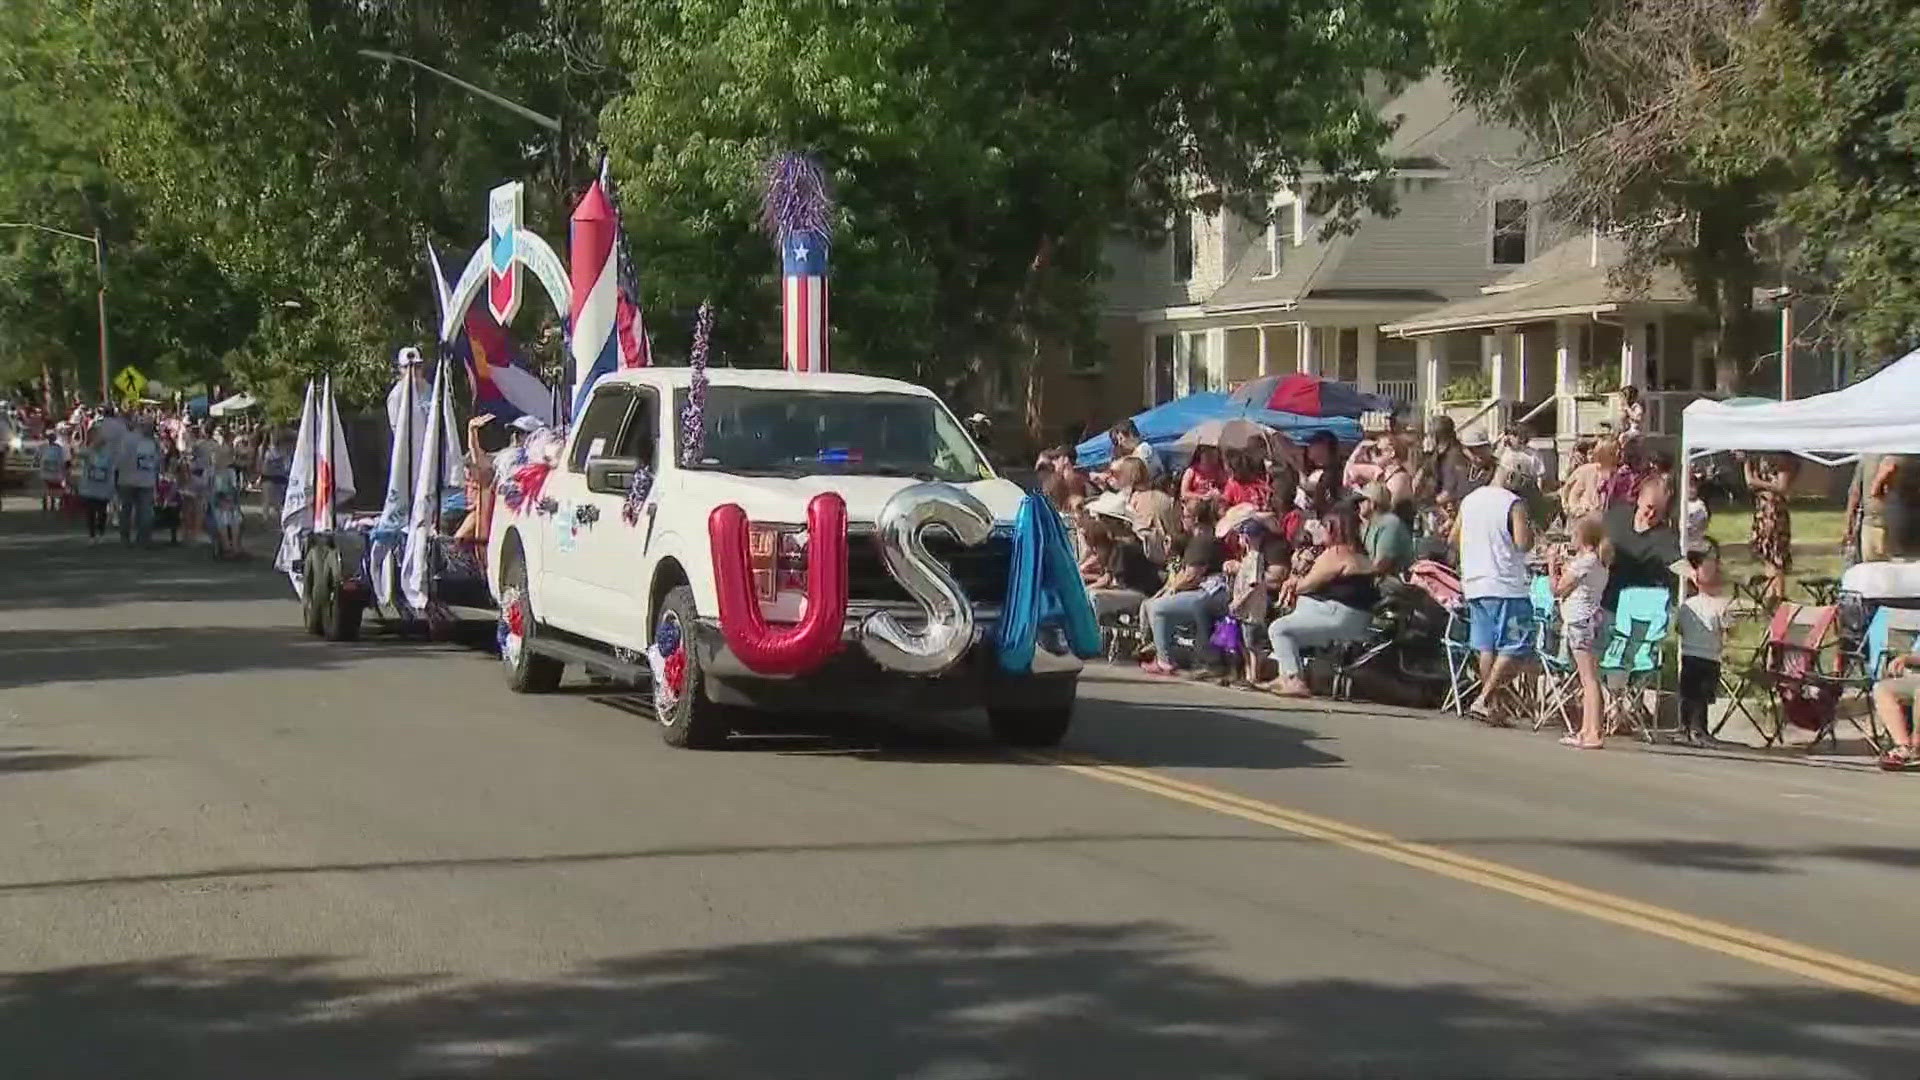 The Fourth of July parade will have more than 120 floats, marching bands and equestrians from around Colorado and surrounding states.